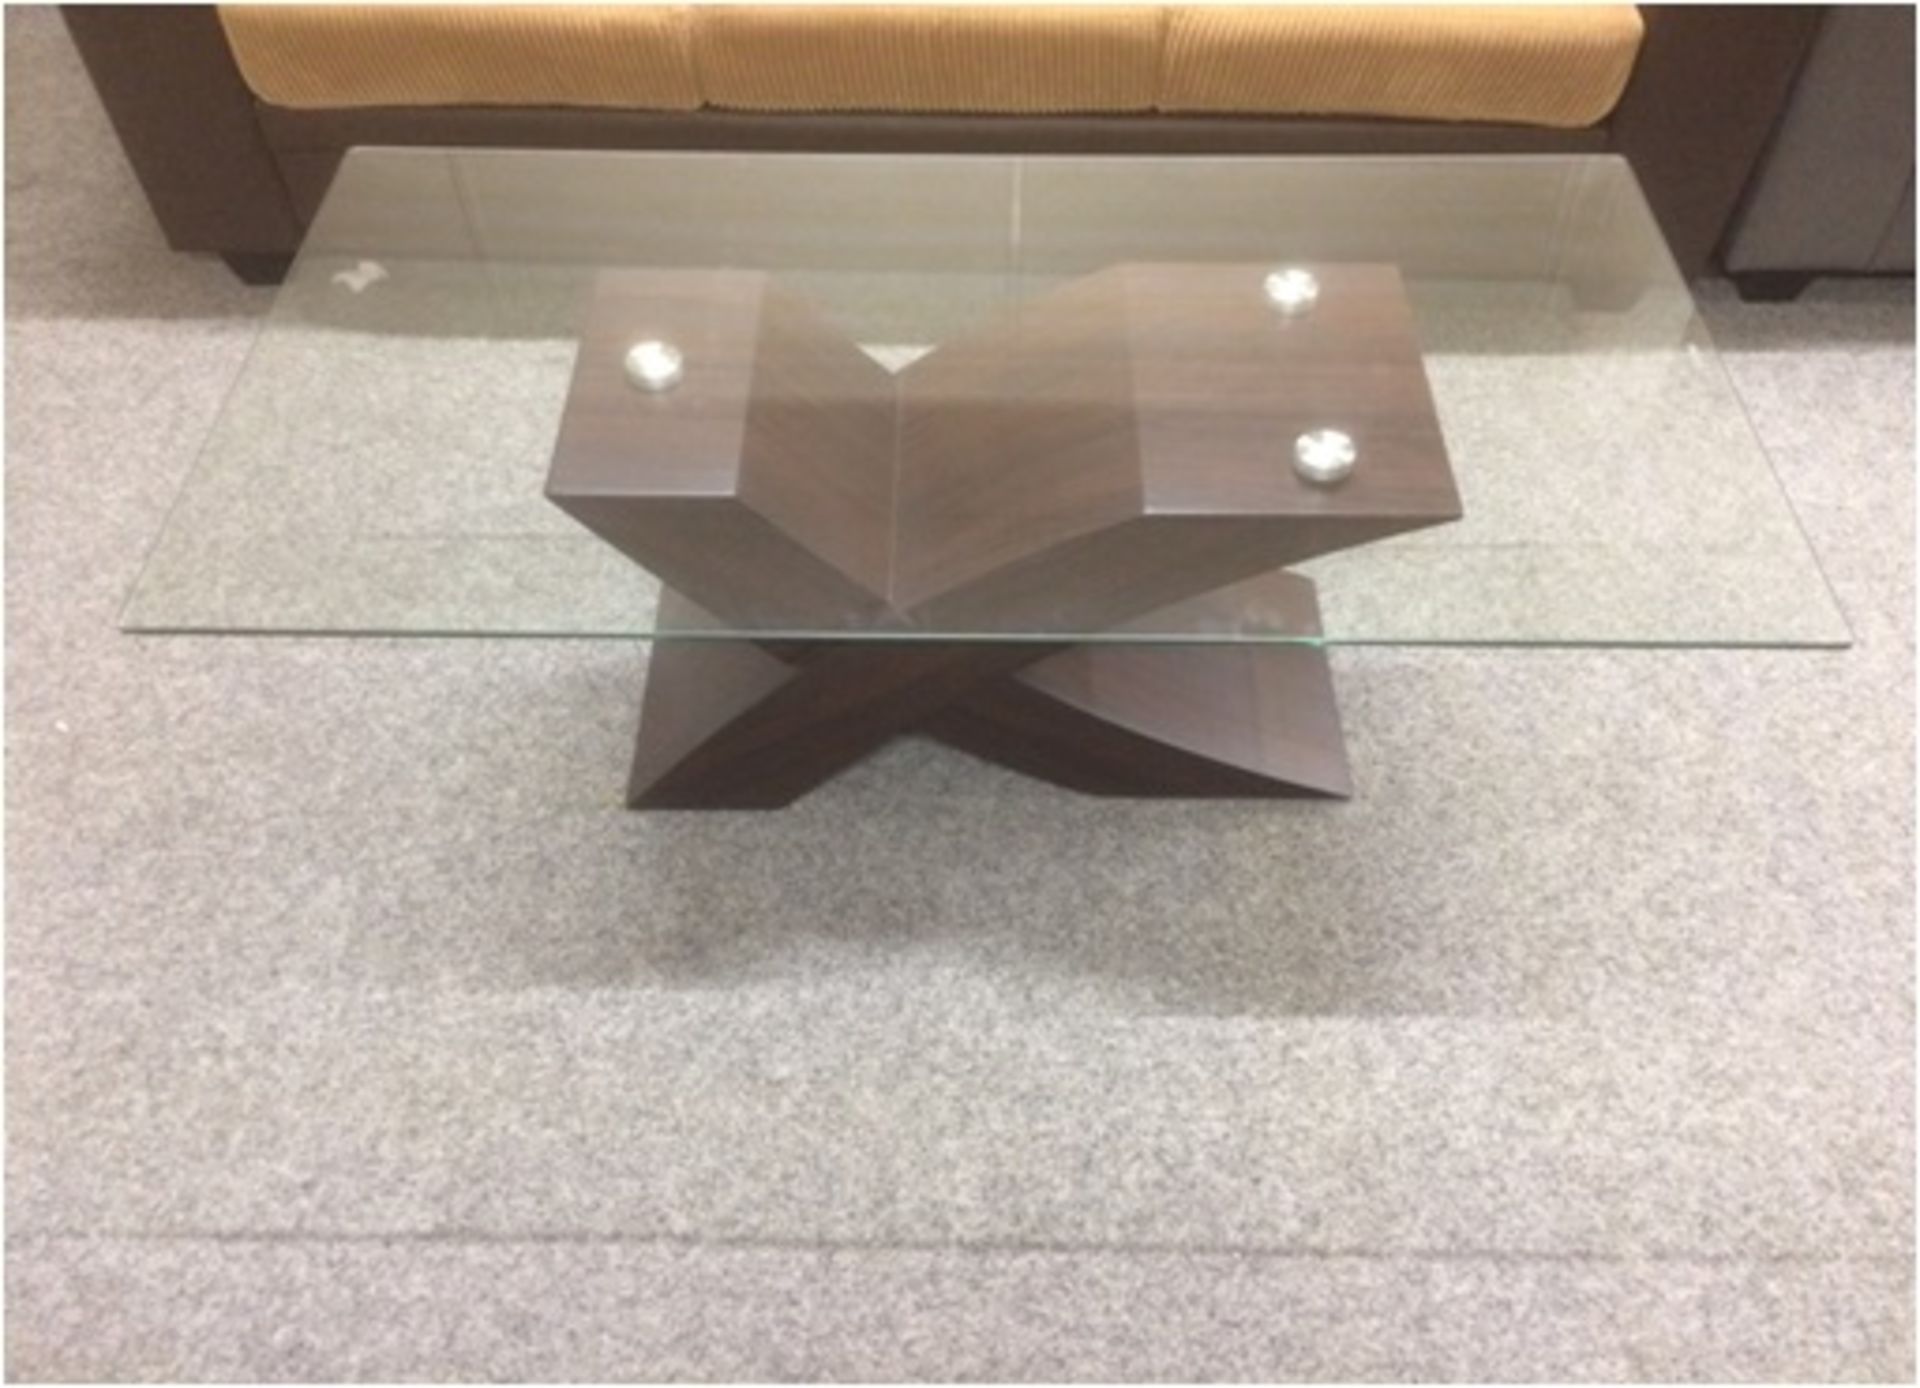 1 x Designer Glass Coffee Table - New & Boxed